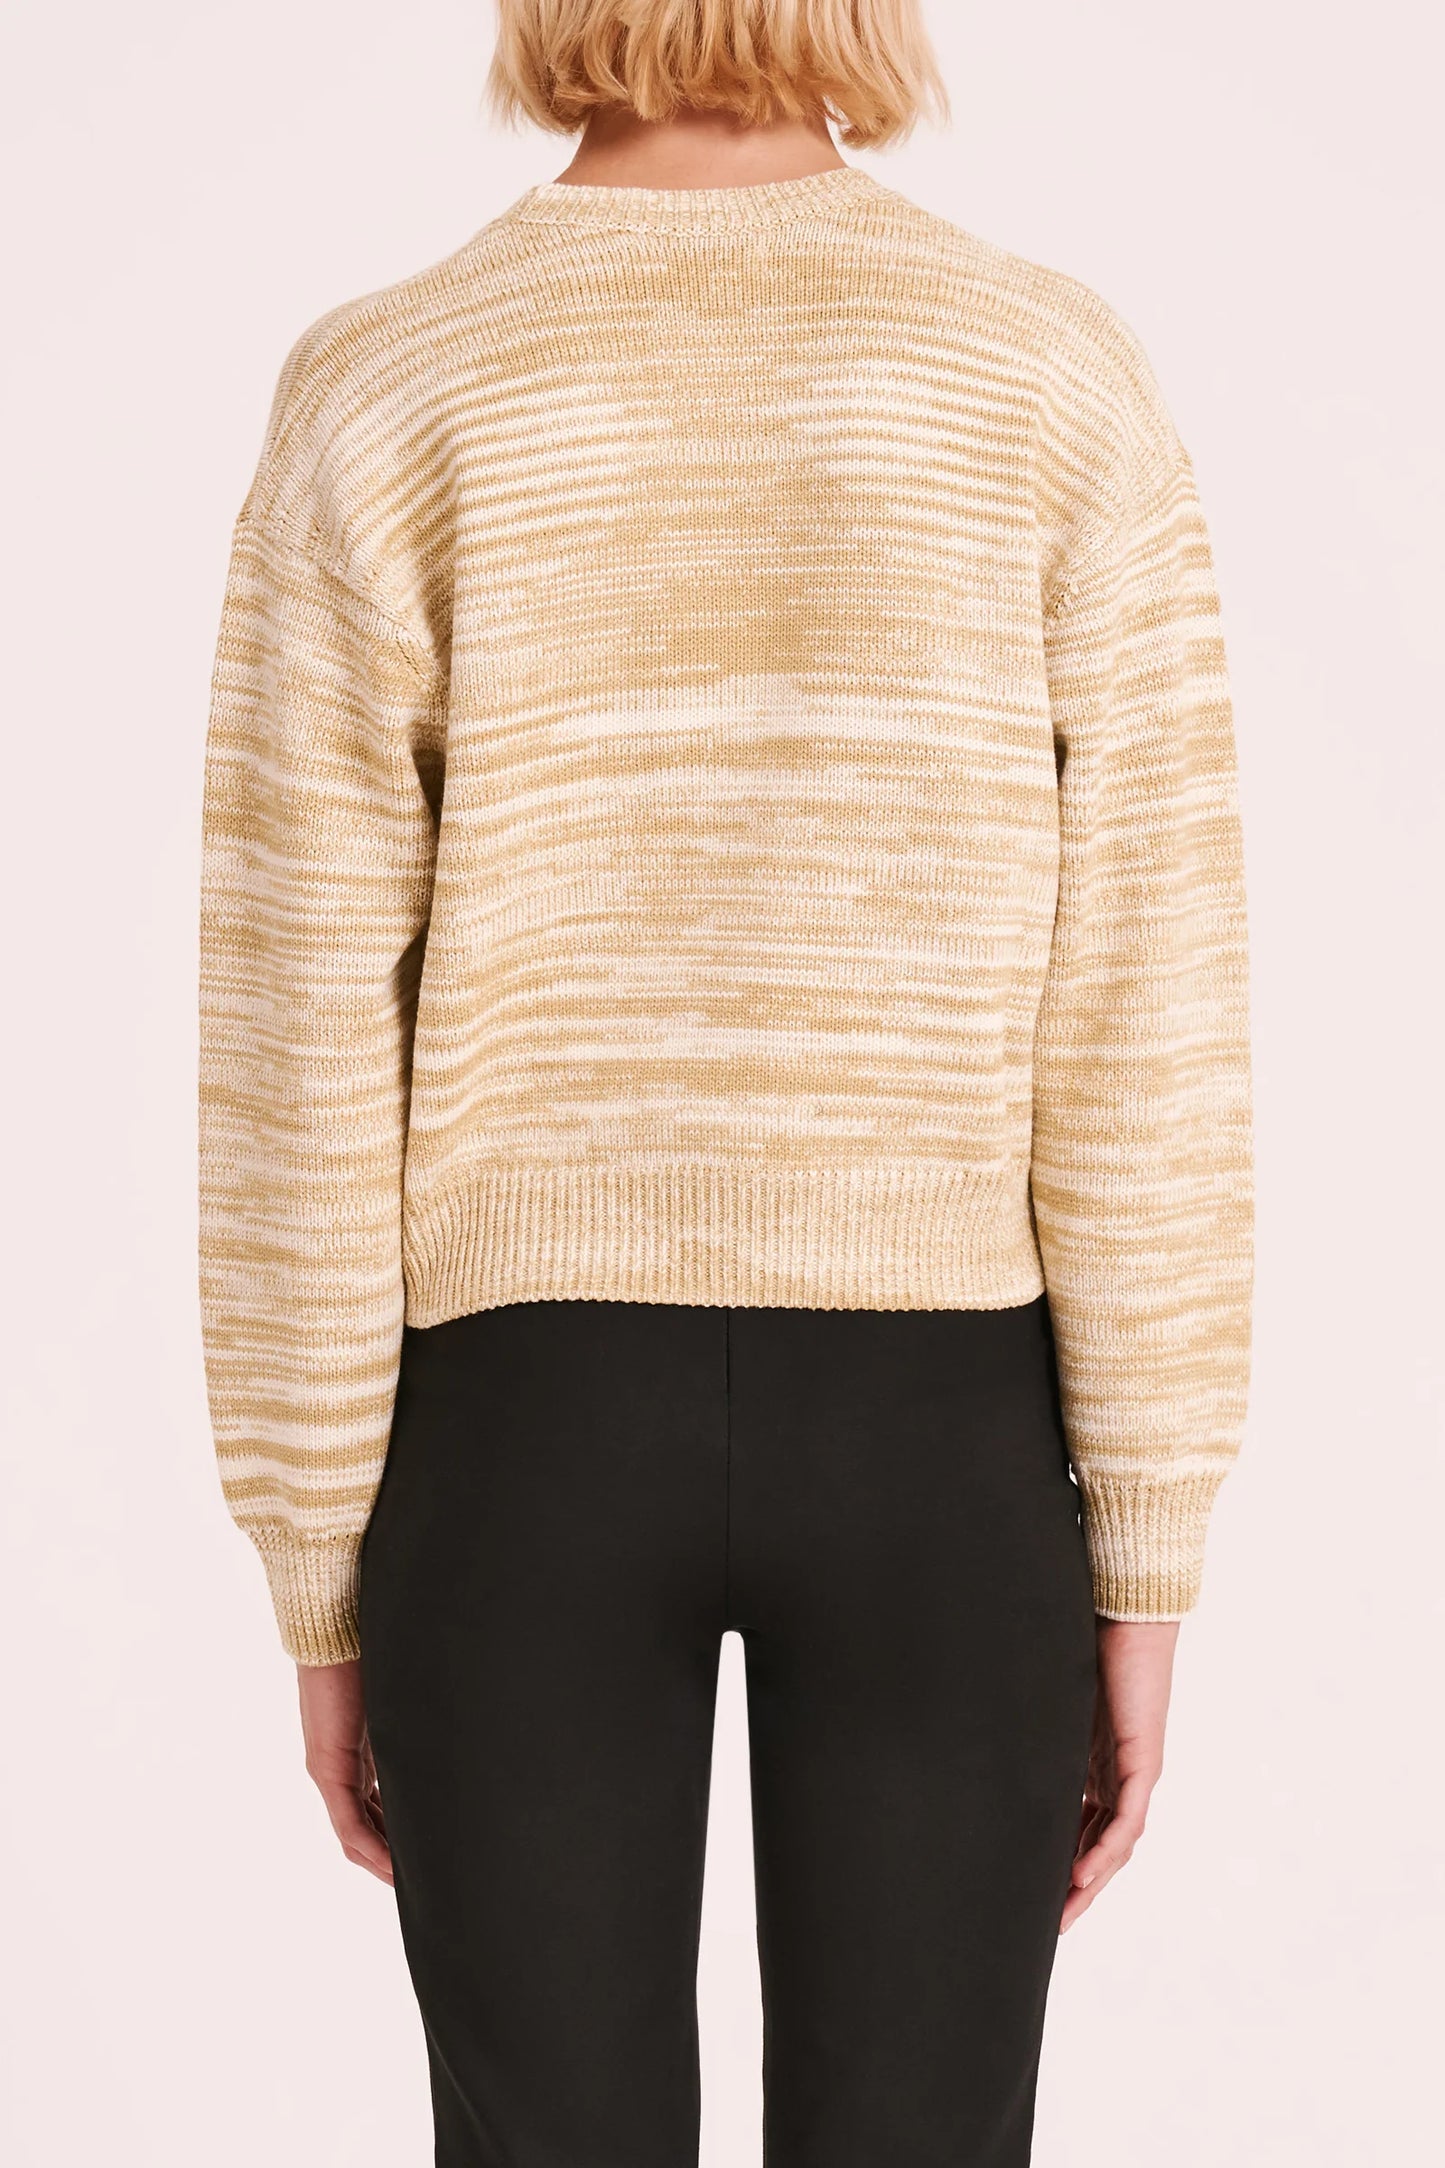 Nude Lucy Reeves Knit in Lime